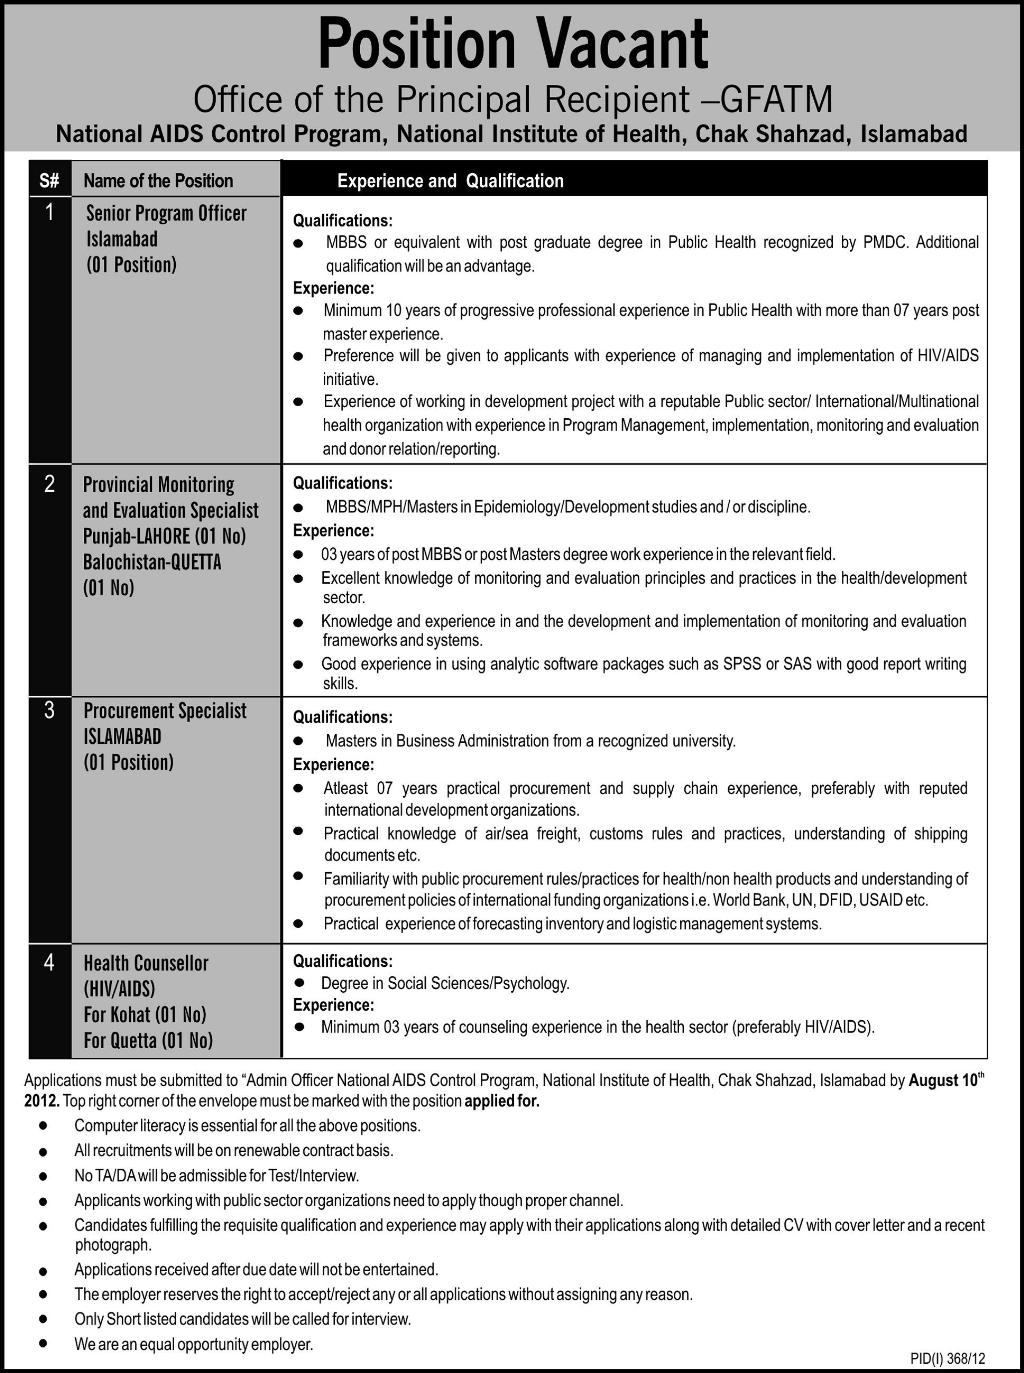 National AIDS Control Program, National Institute of Health Requires Management Staff and Health Counselor (